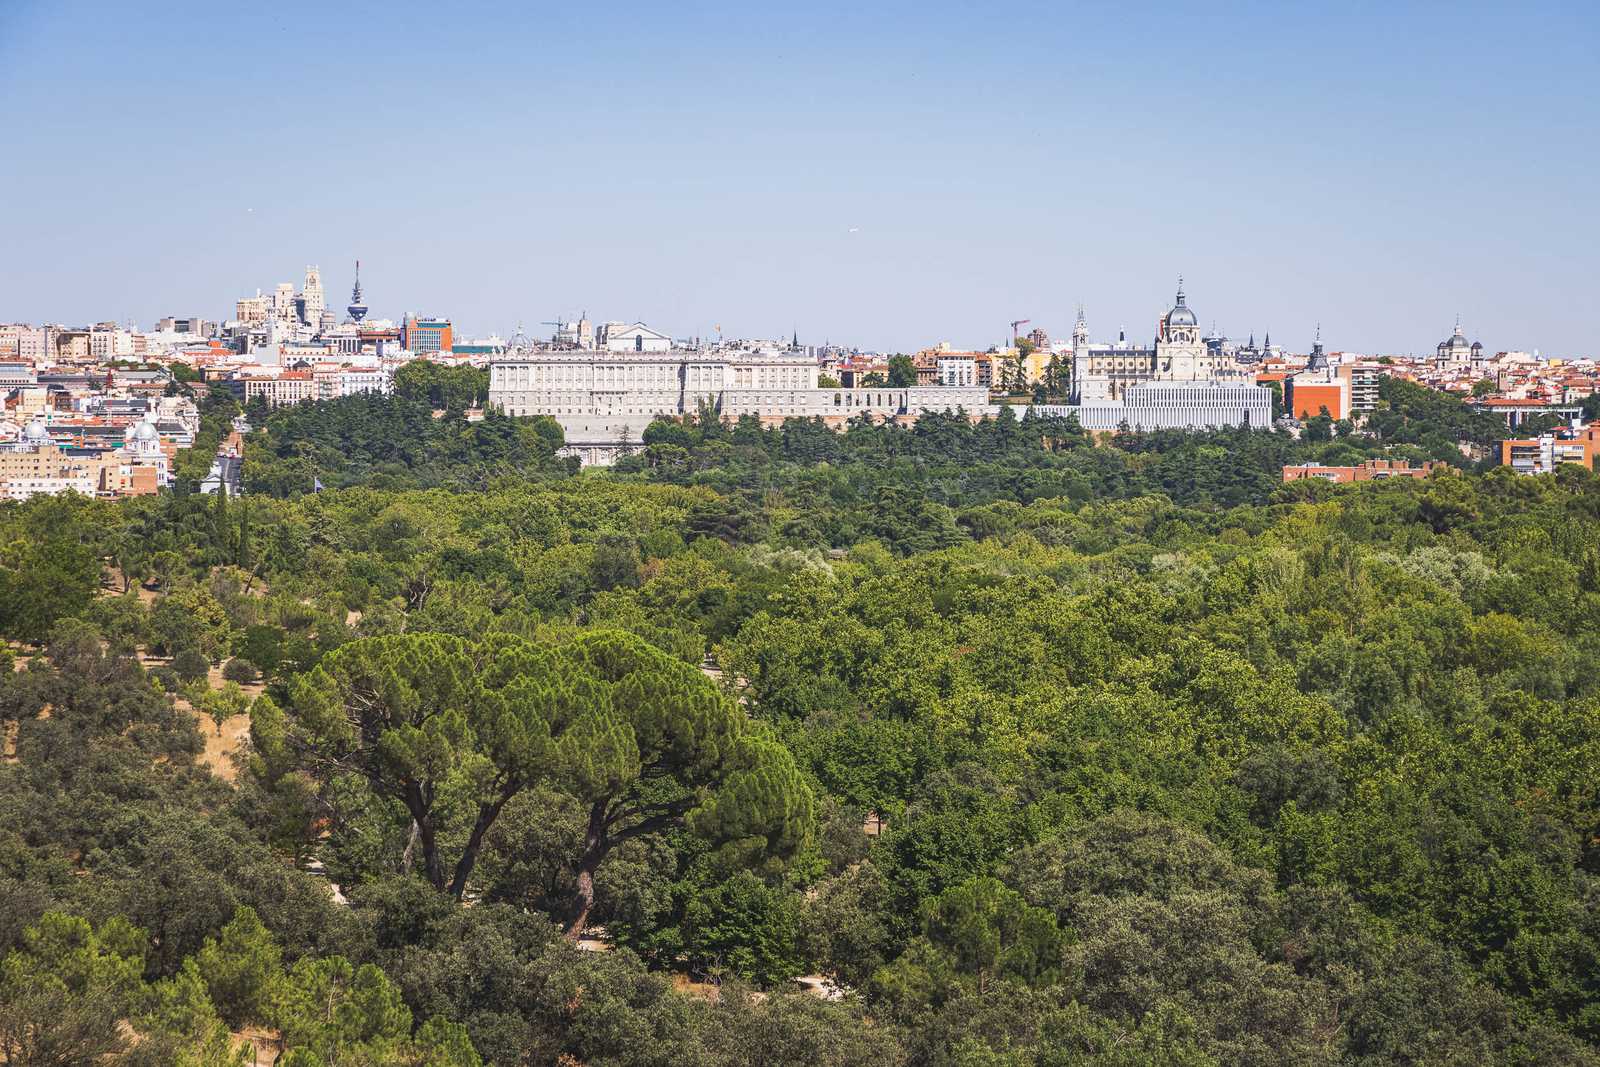 The Madrid skyline viewed from Casa de Campo